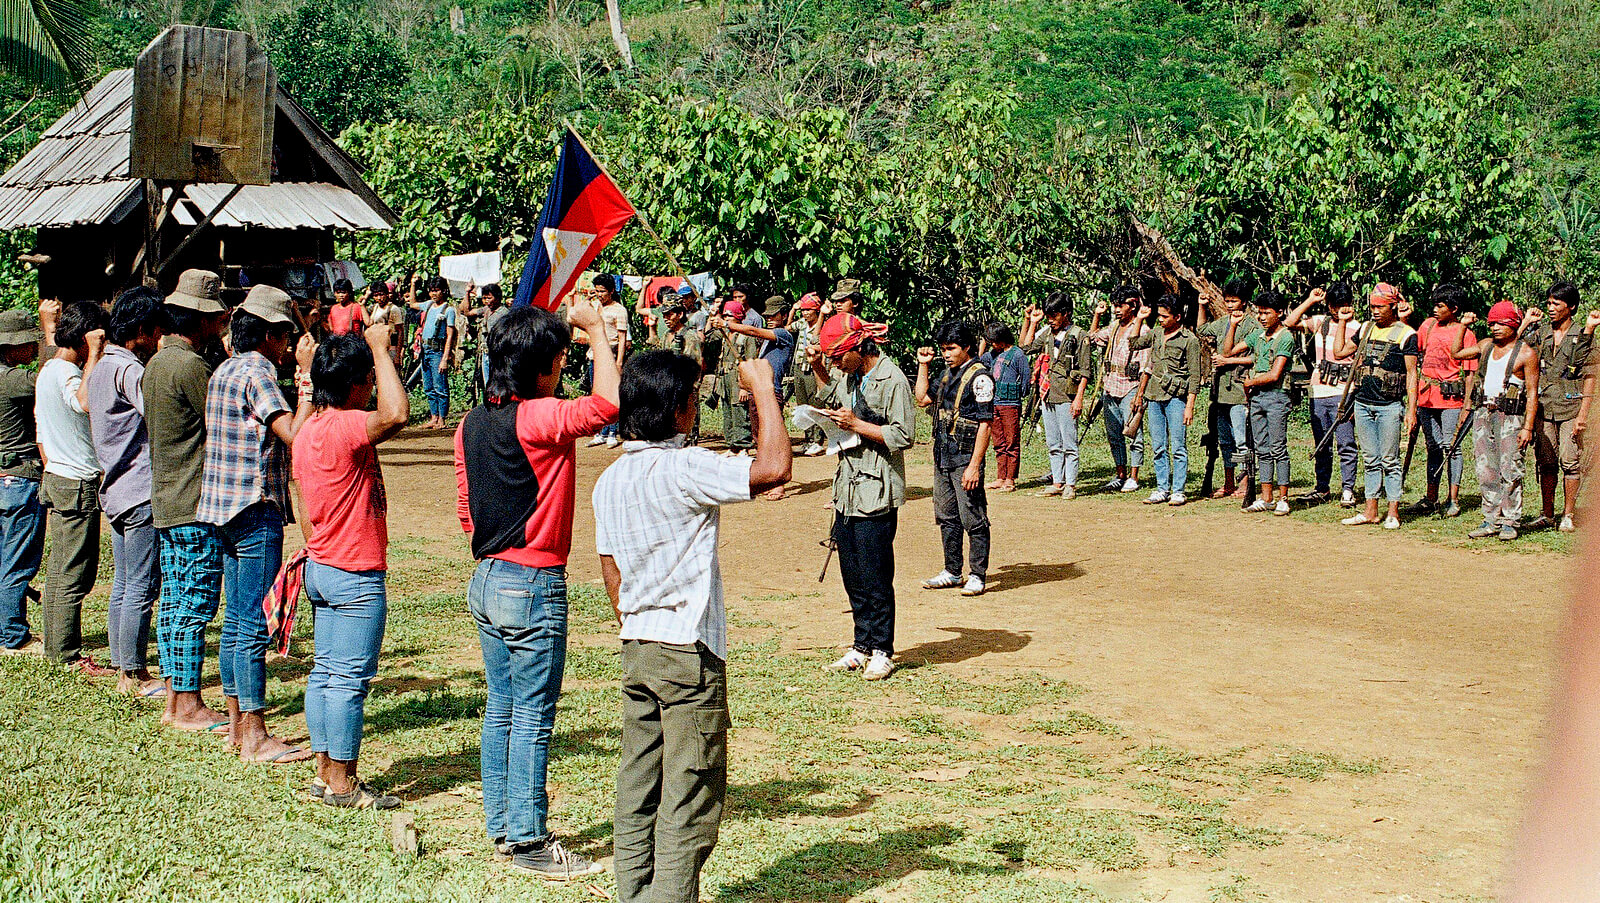 Communist New Peoples Army guerrilla recruits, foreground, take an oath of loyalty before a company-sized guerrilla force, Feb. 13, 1987 in the jungles of Agusan, southern Philippines. Alberto Marquez | AP